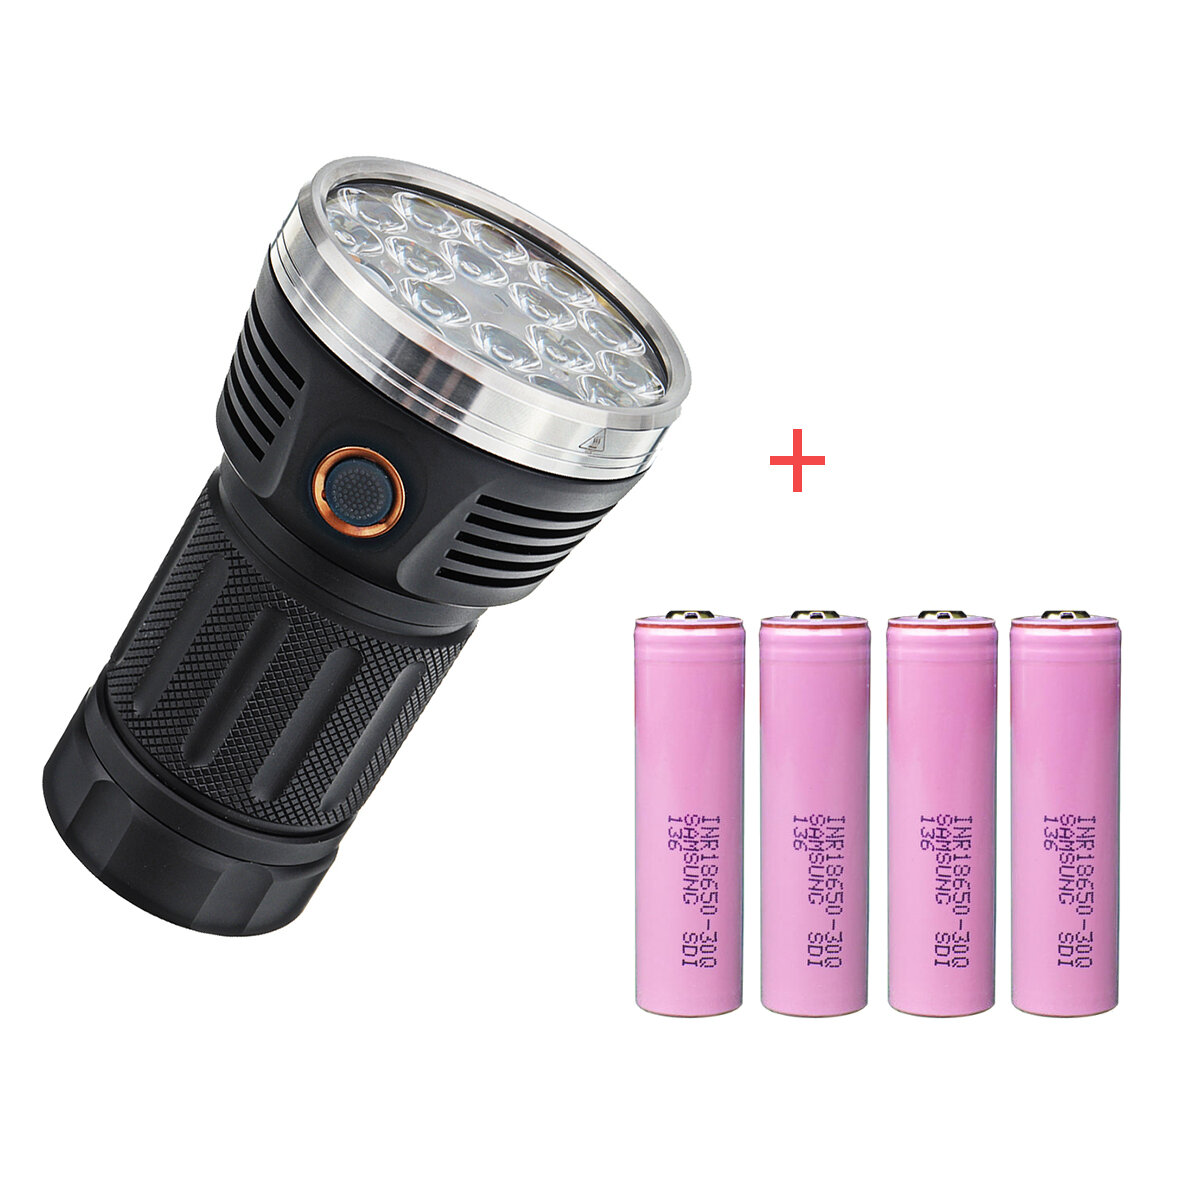 best price,astrolux,mf01s,sand,4000k,flashlight,with,4x,samsung,30q,20a,18650,coupon,price,discount